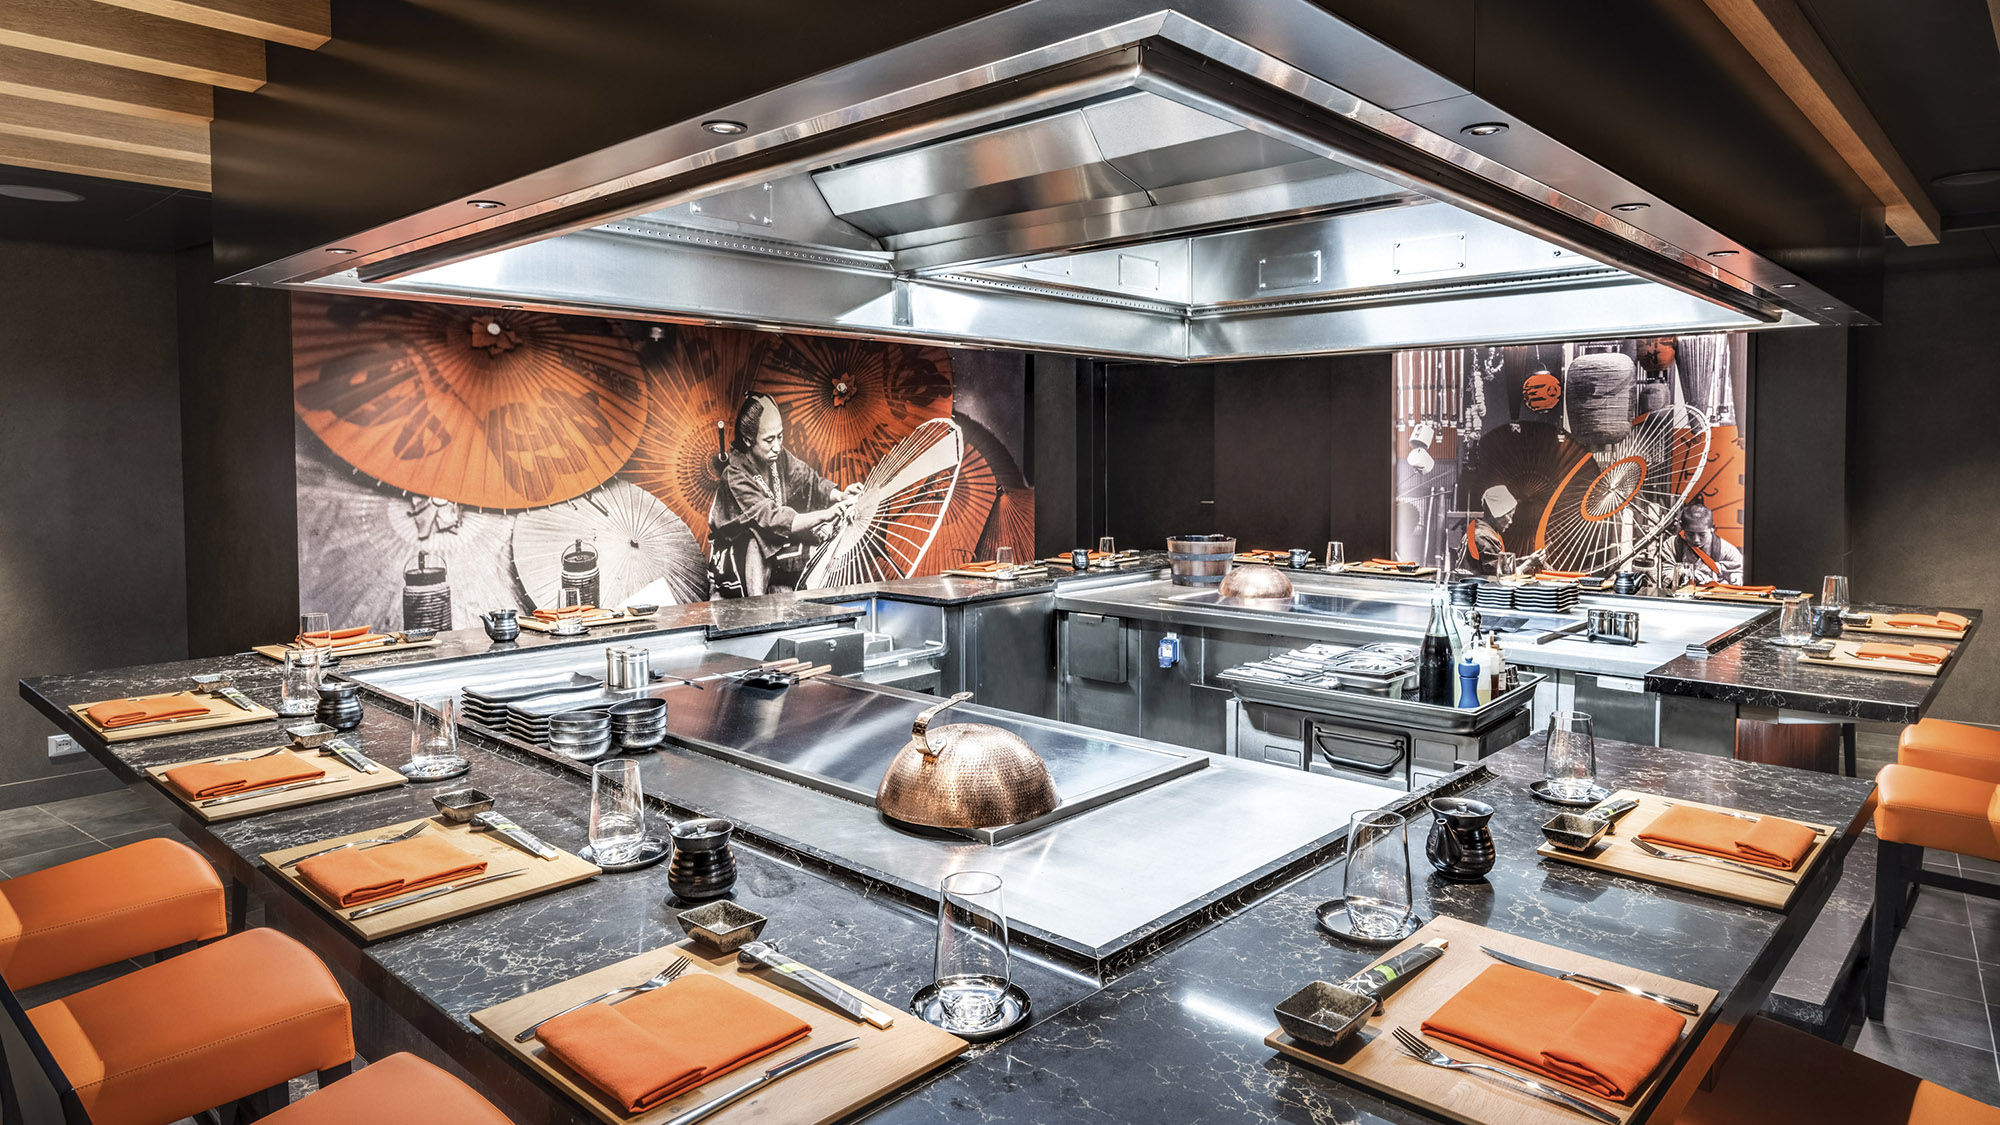 With eight grills, Kaito Teppanyaki is the largest teppanyaki restaurant in the MSC fleet. The chefs there put on a show that was a hit with the kids.